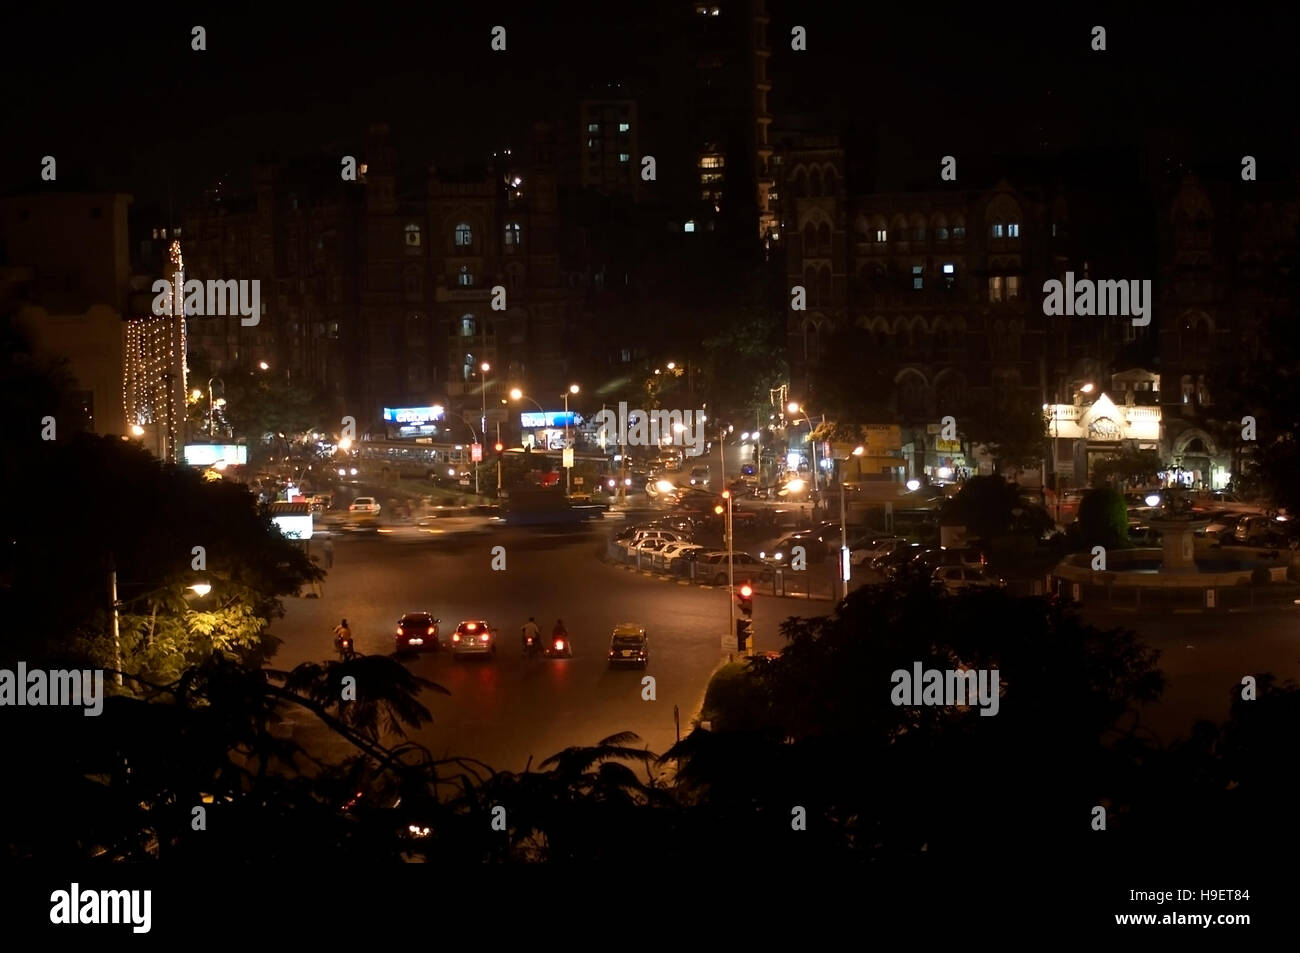 Mumbai by night. View of circle near Police Commissioner's Office, near Gateway of India Stock Photo